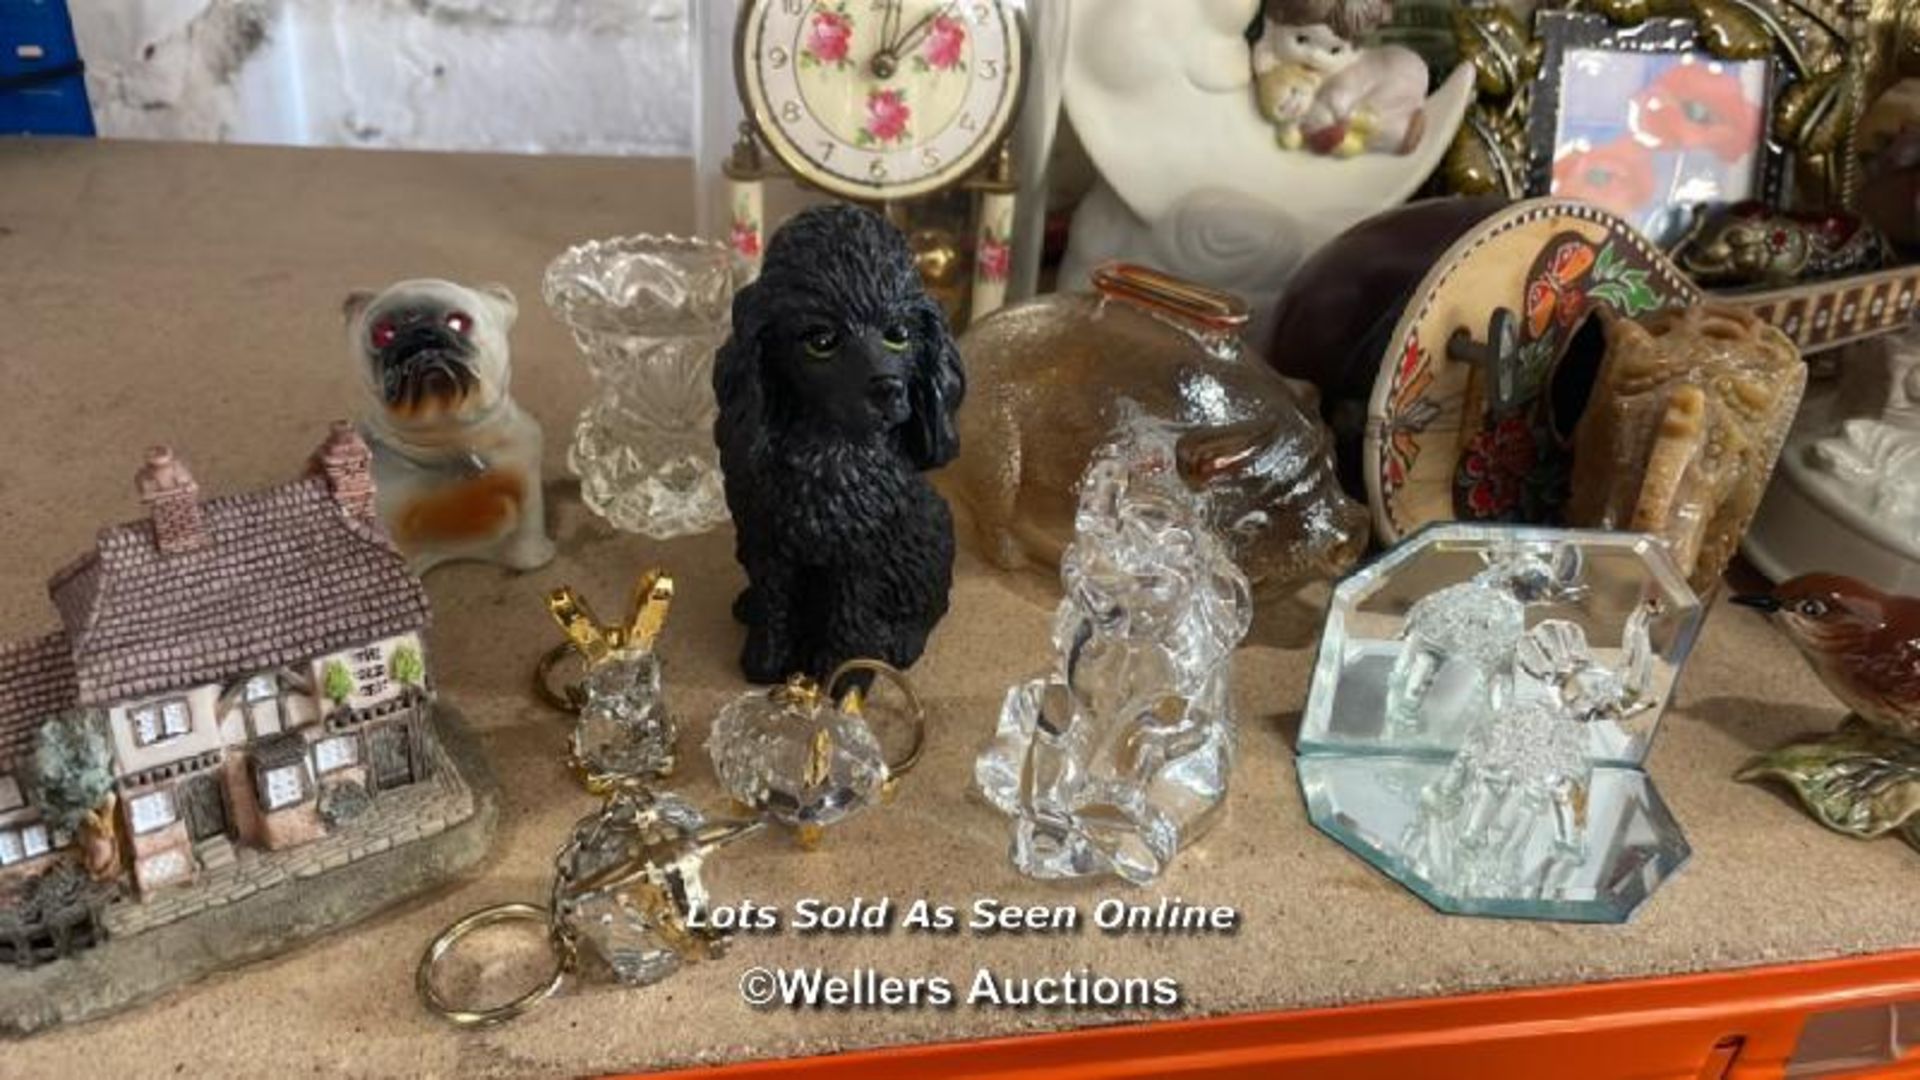 ASSORTED BRIC-A-BRAC INCLUDING DOLLS, BOTTLES, CLOCK AND ELEPHANTS - Image 6 of 8